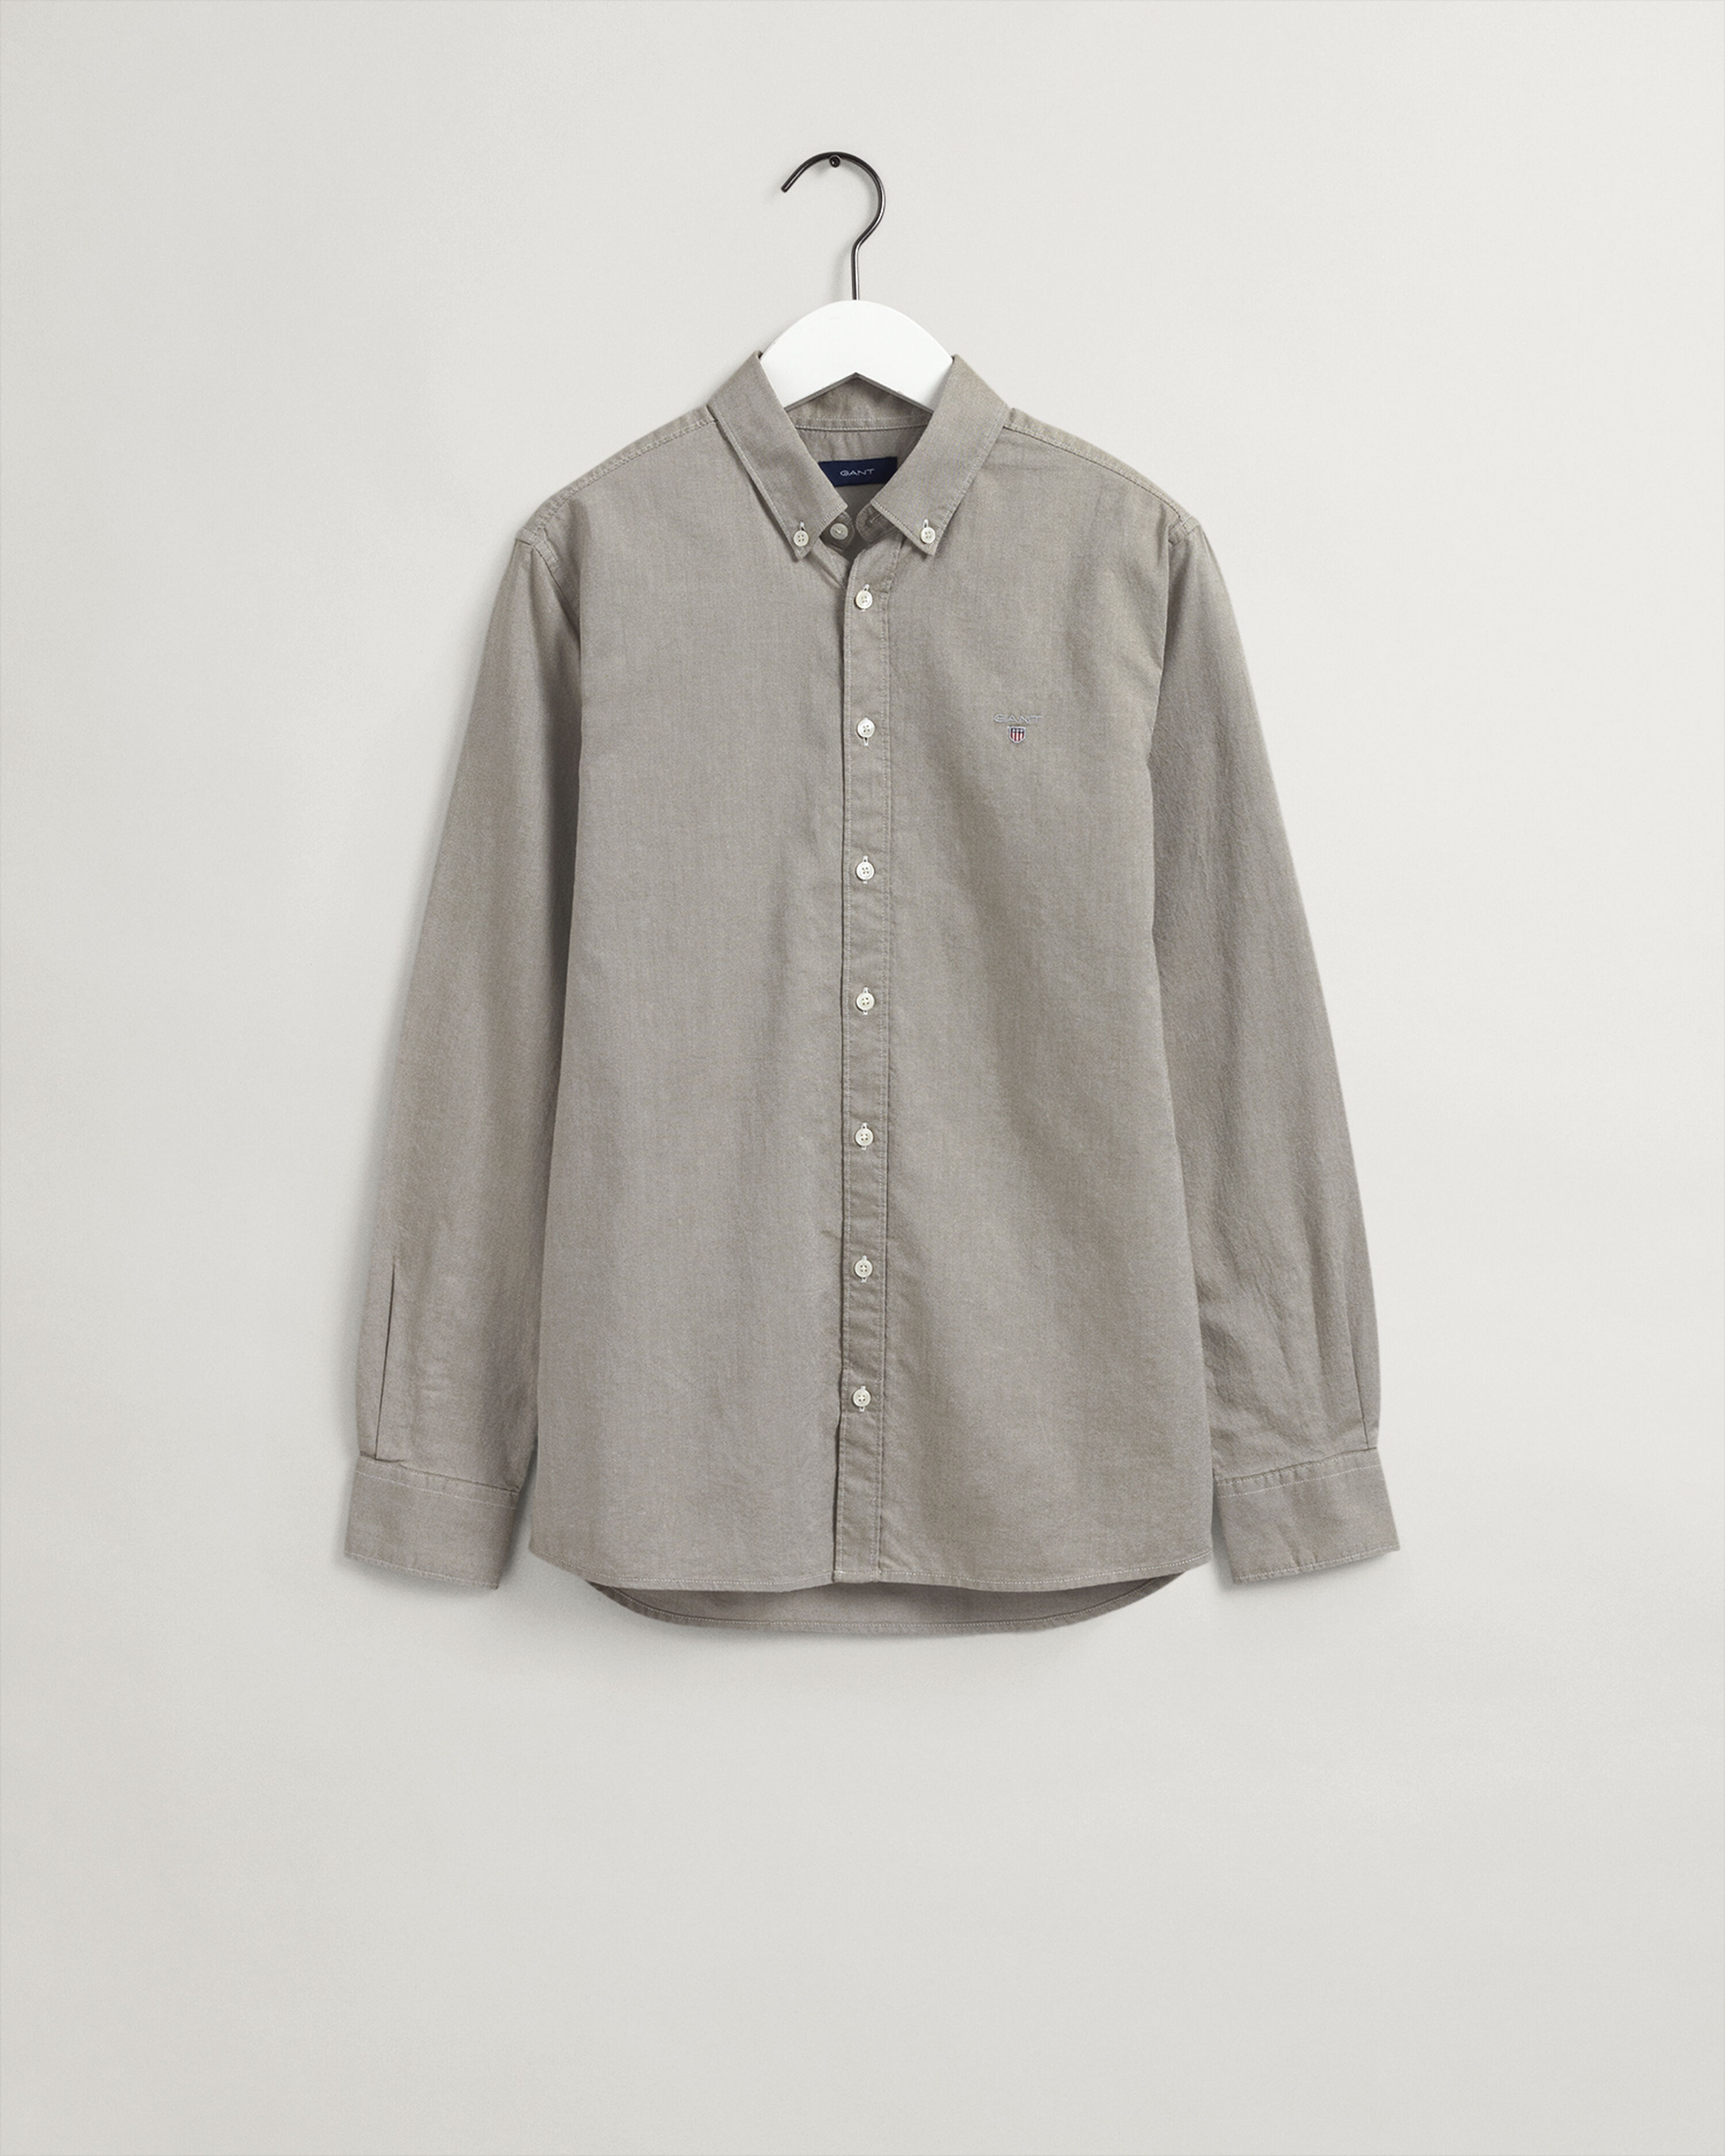  Teens Archive Oxford Shirt 